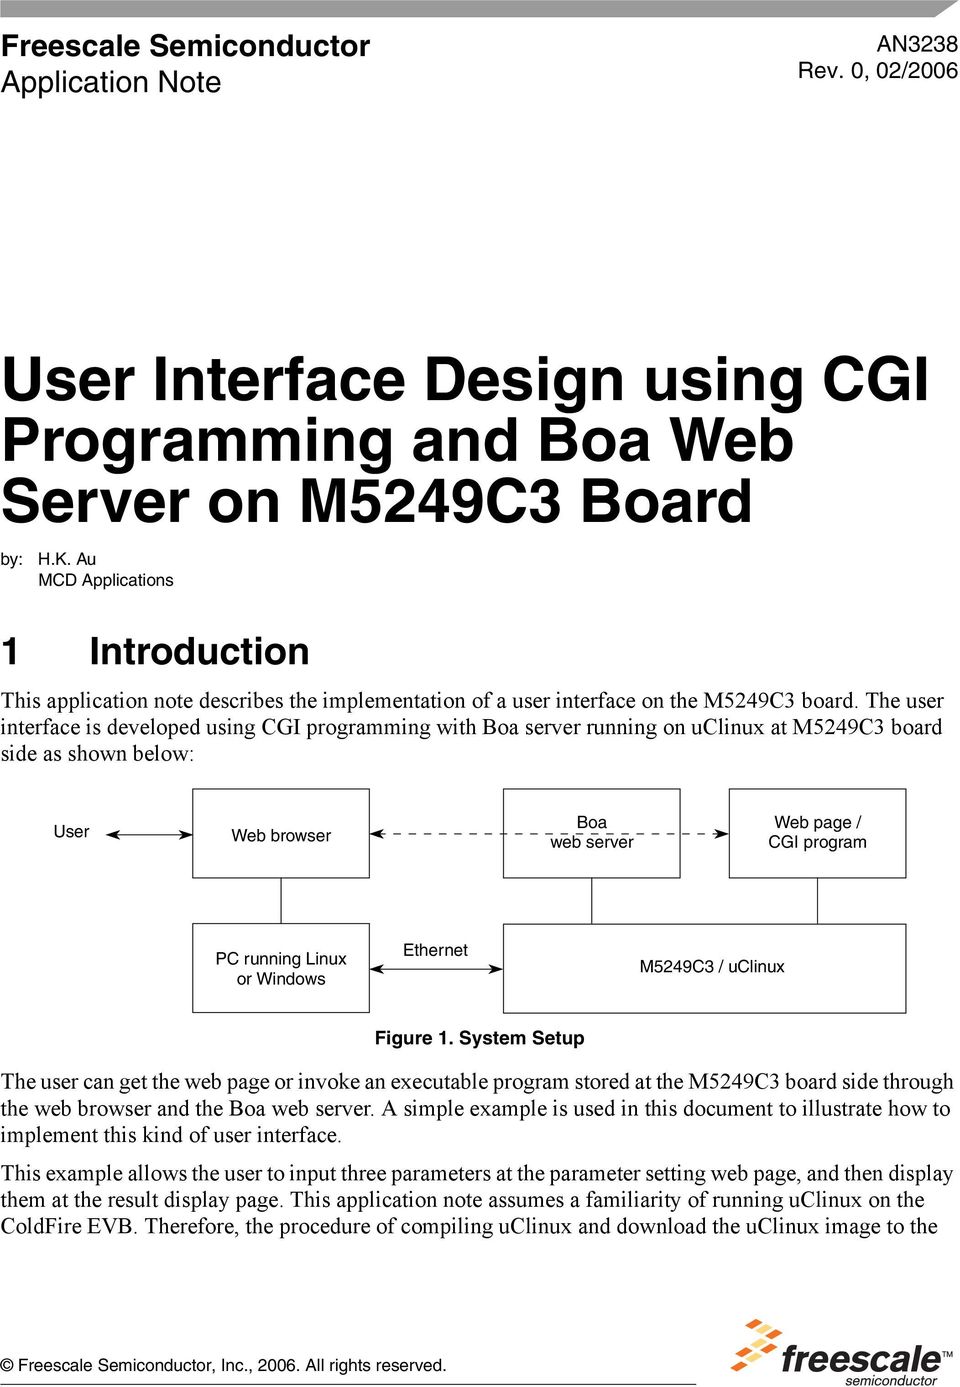 The user interface is developed using CGI programming with Boa server running on uclinux at M5249C3 board side as shown below: User Web browser Boa web server Web page / CGI program PC running Linux